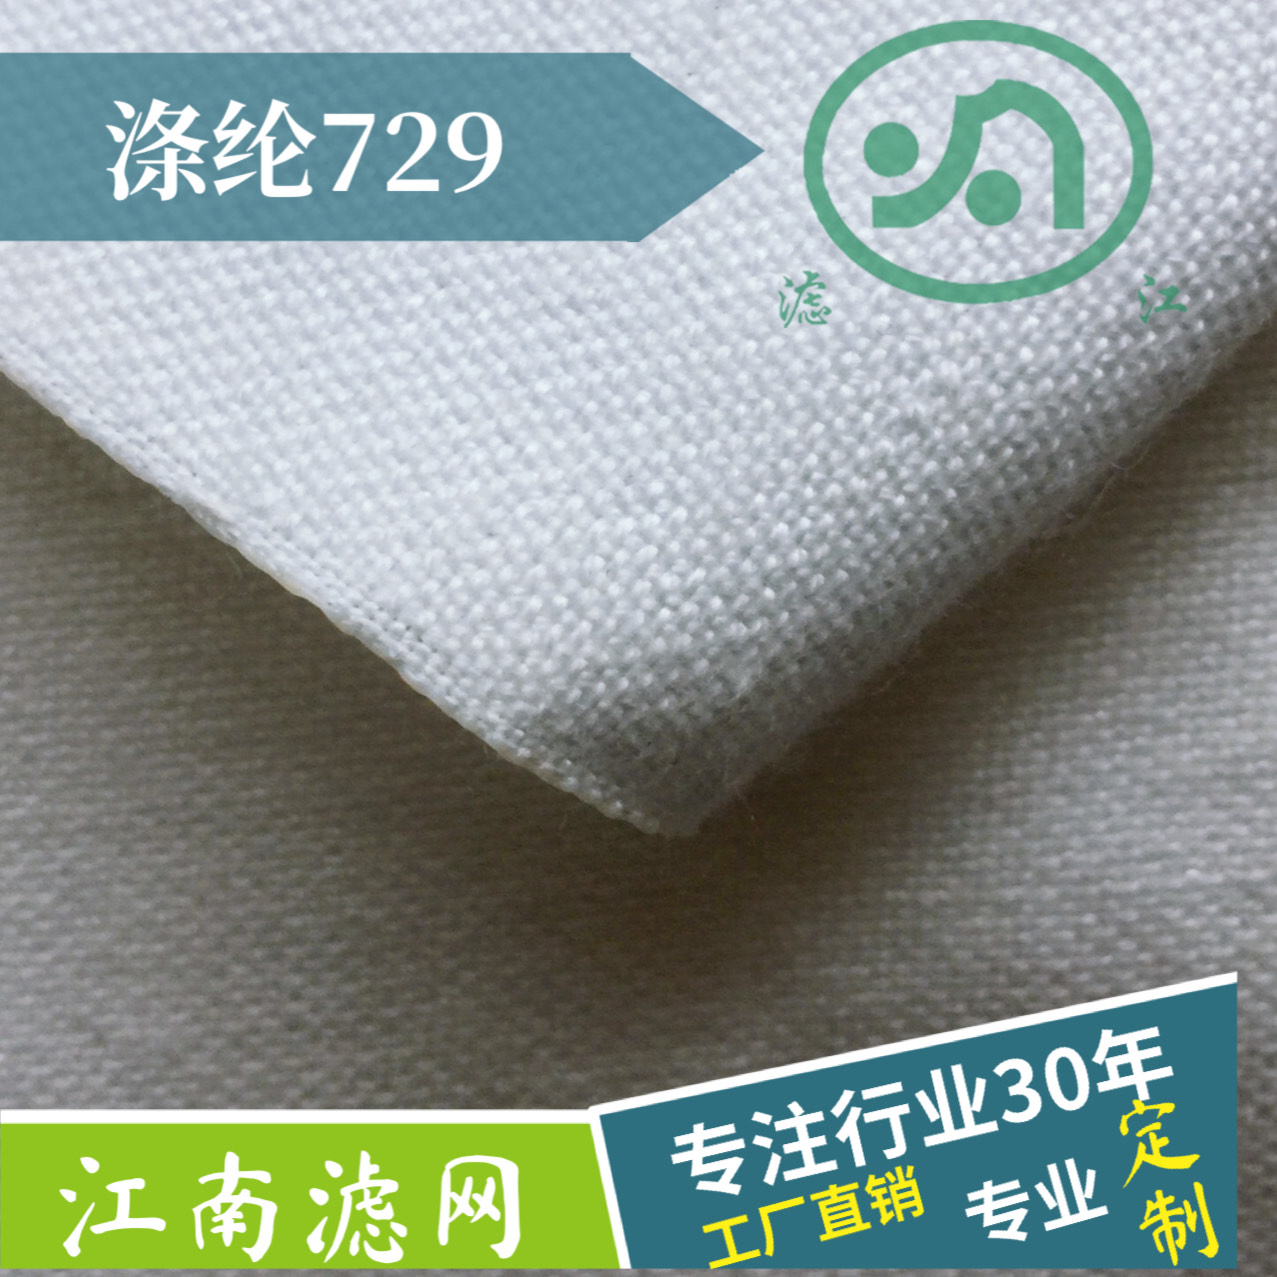 Polyester filter cloth 729